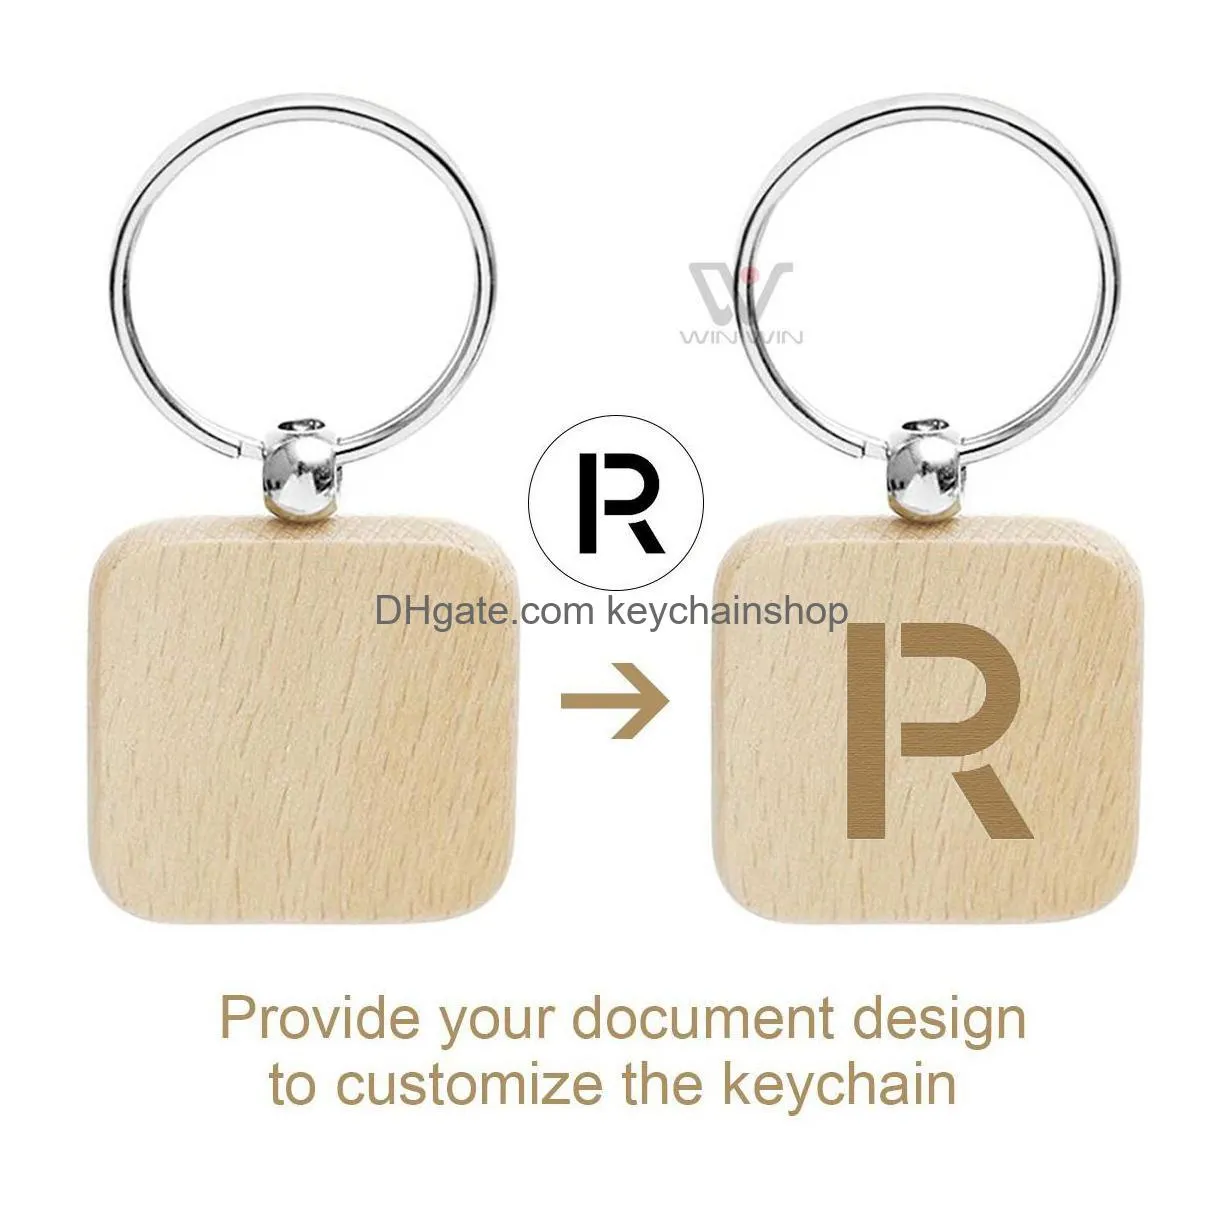 Blank Round Rec Wooden Key Chain Diy Pendant Wood Keychain Keyring Tags For Birthday Christmas New Year Gifts Fy5473 Tt1110 Drop Deliv Dh6Hc